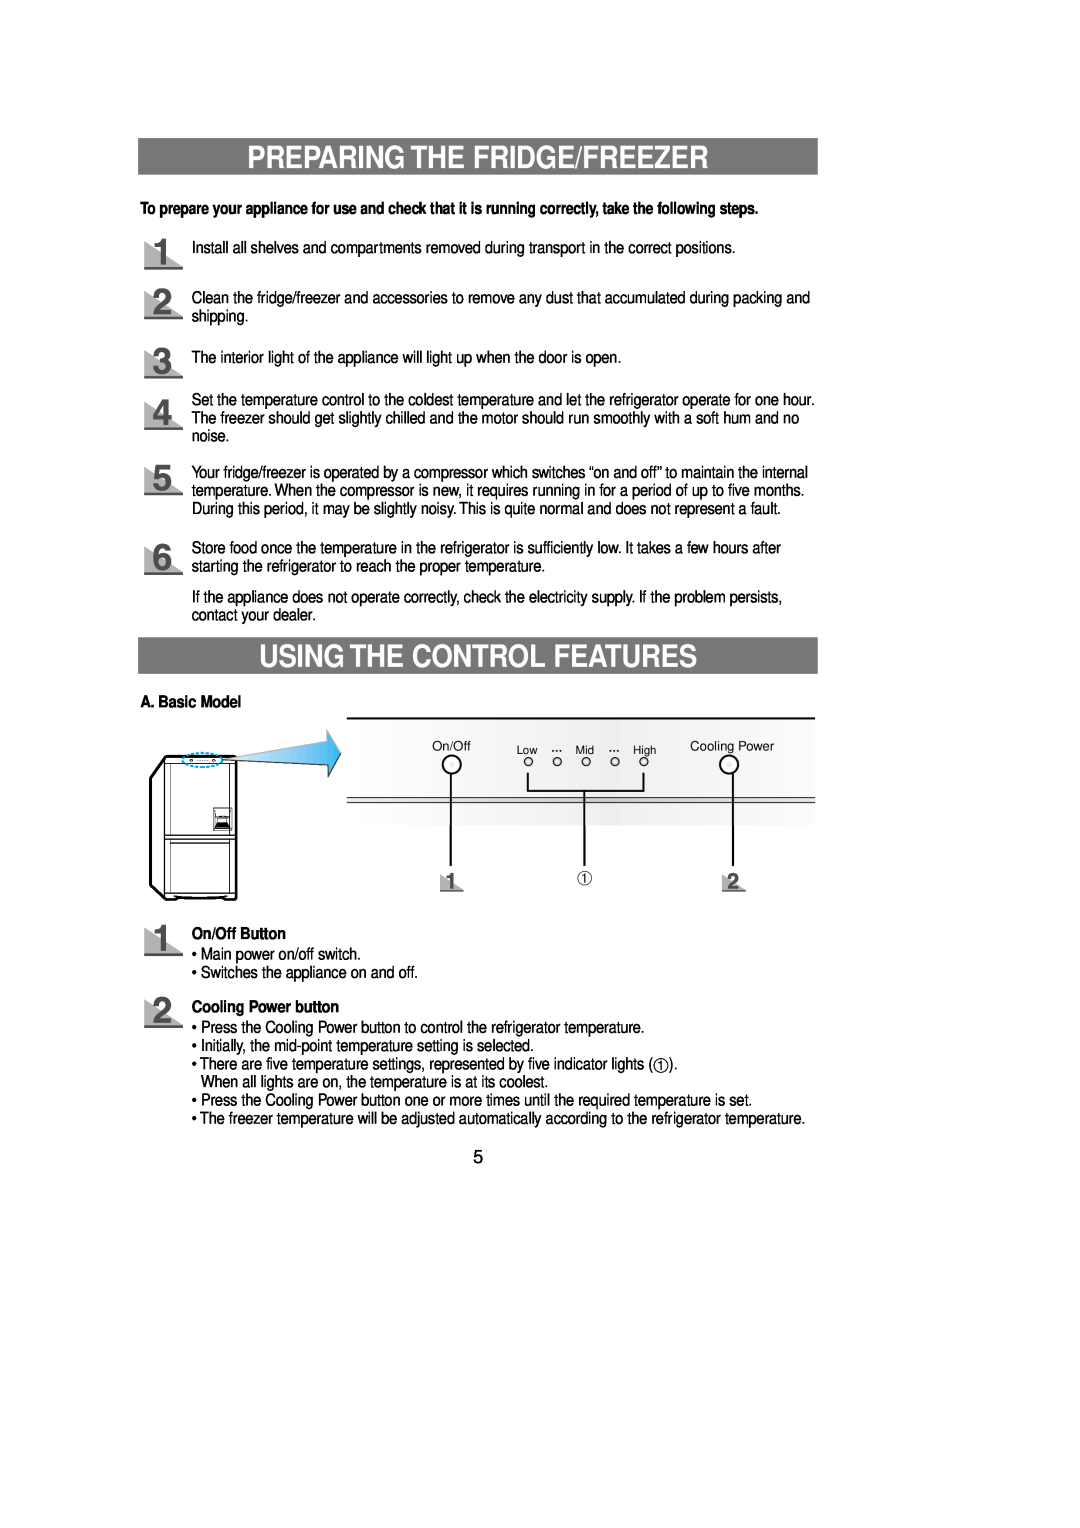 Samsung Rl 39 manual Preparing The Fridge/Freezer, Using The Control Features, A. Basic Model, On/Off Button 